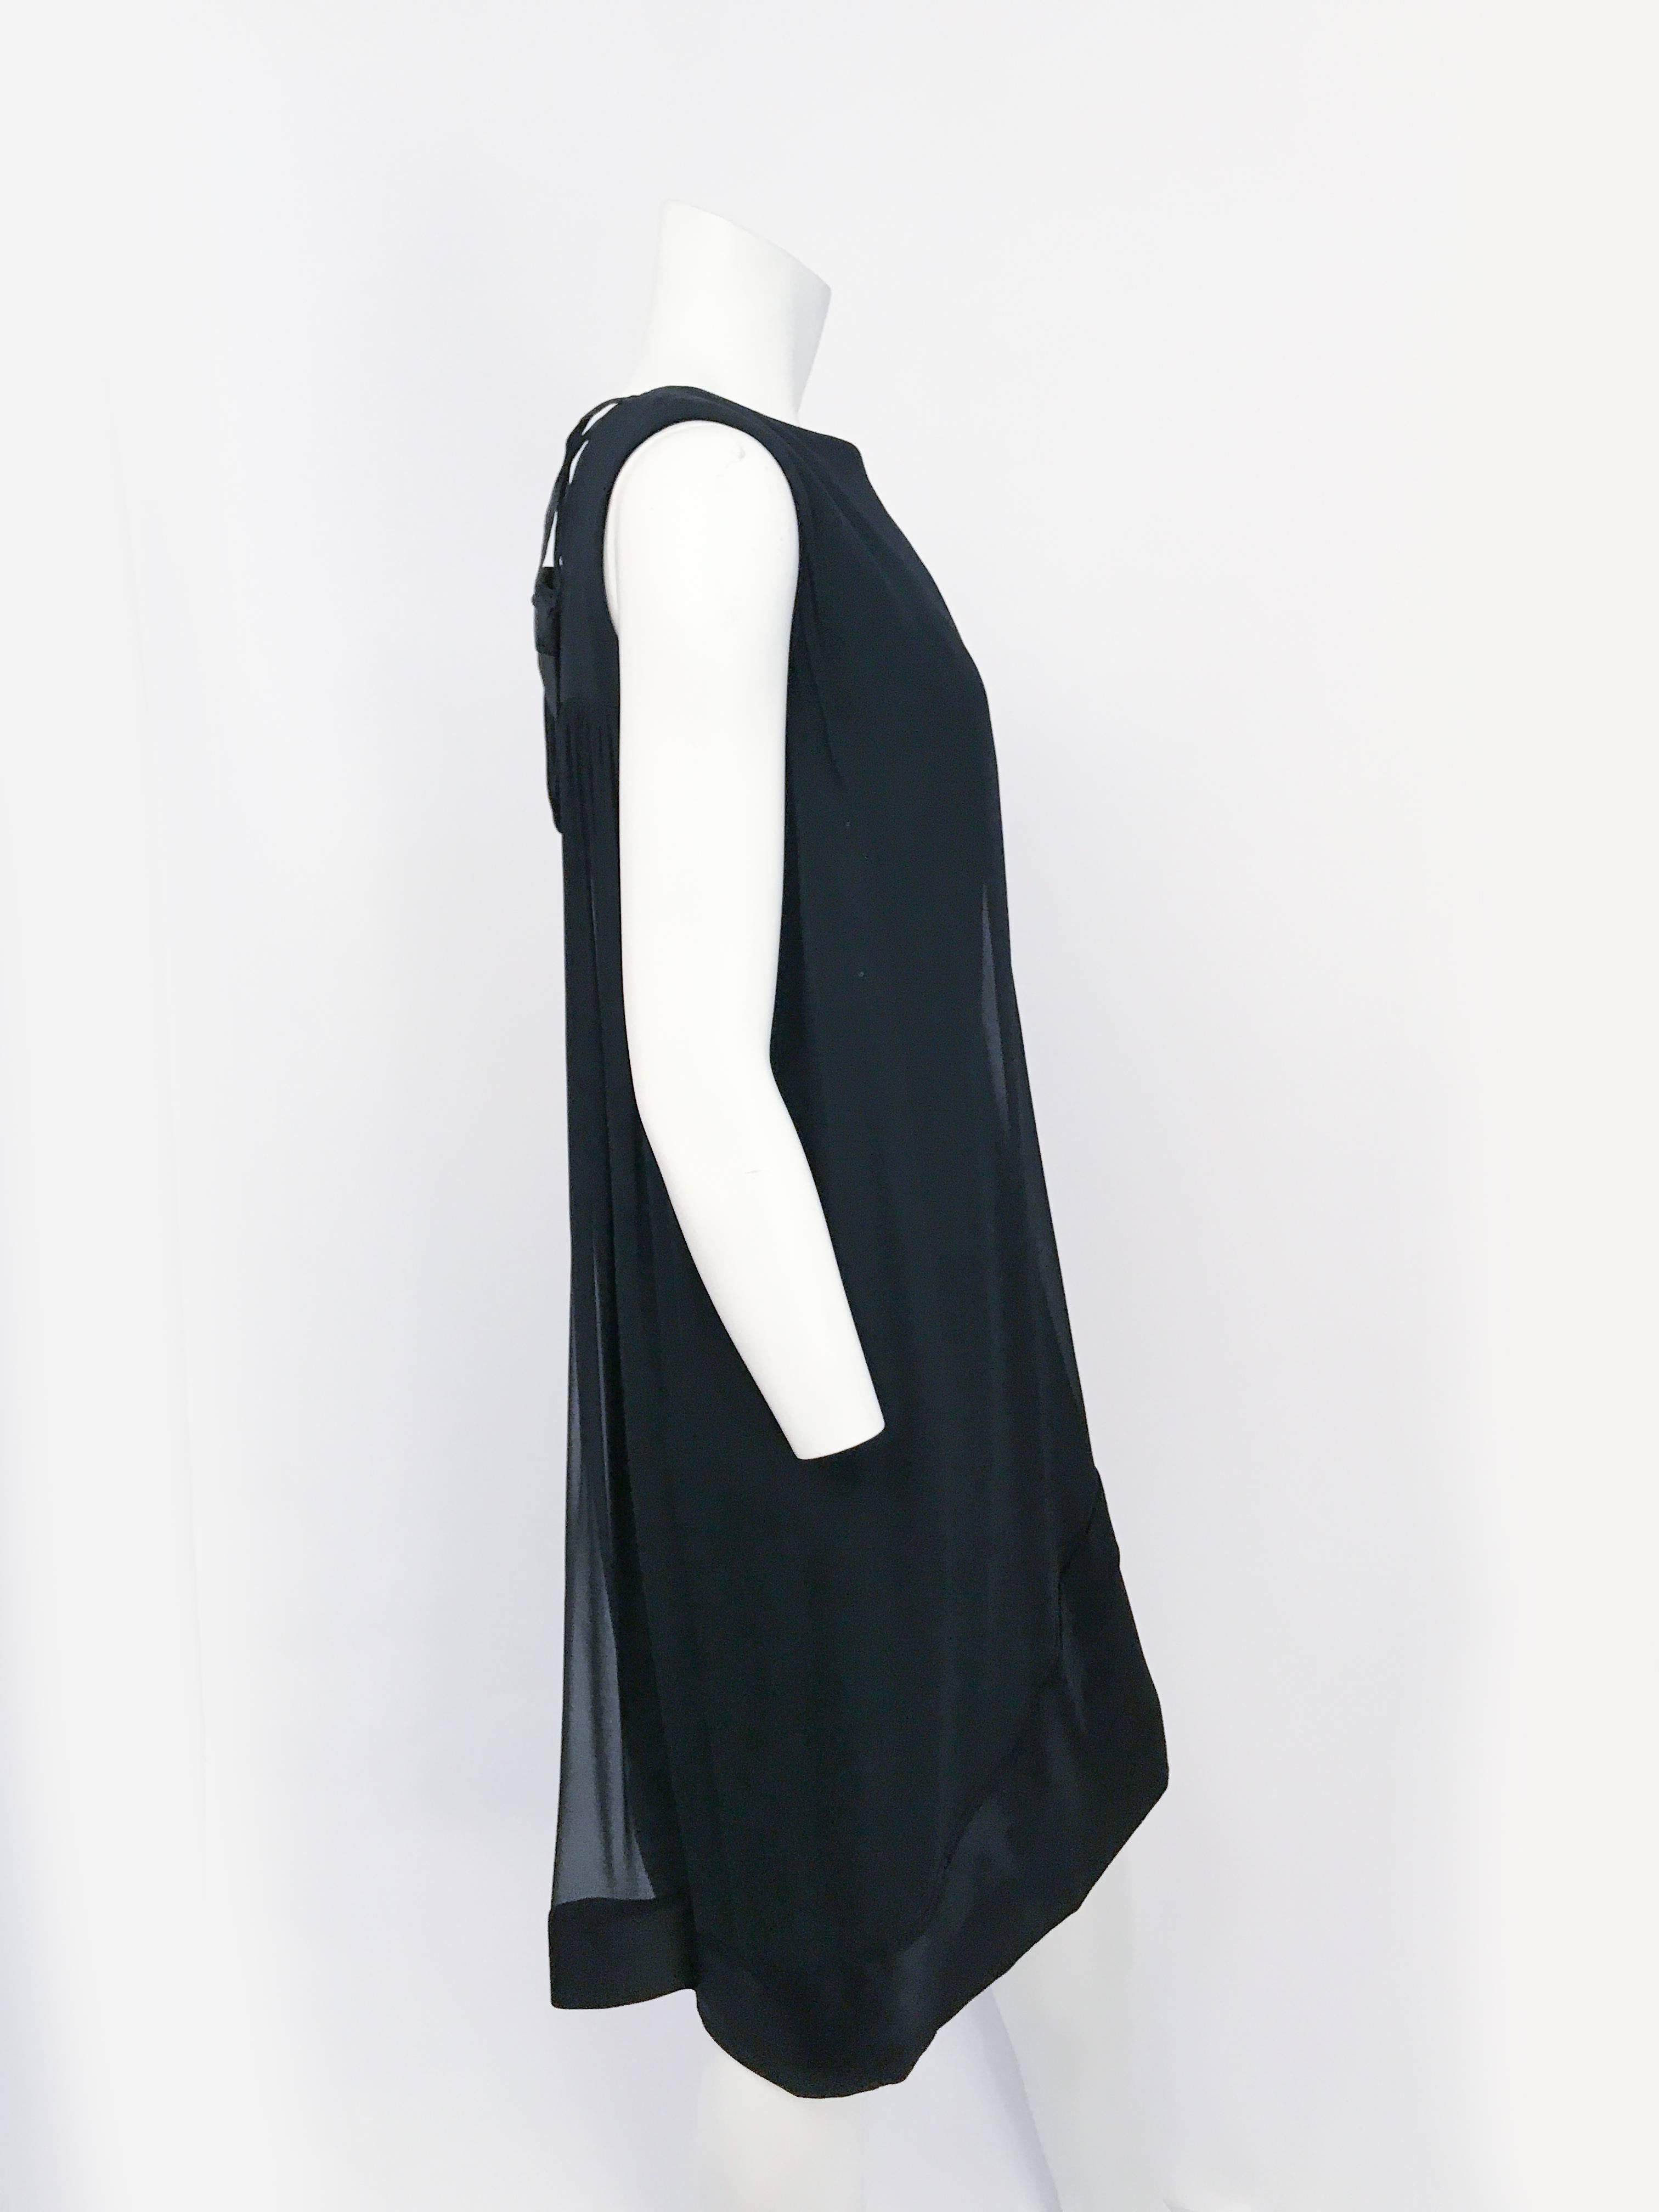 1960s Black Silk Crepe Sheath Dress with Chiffon and Satin Drape In Good Condition For Sale In San Francisco, CA